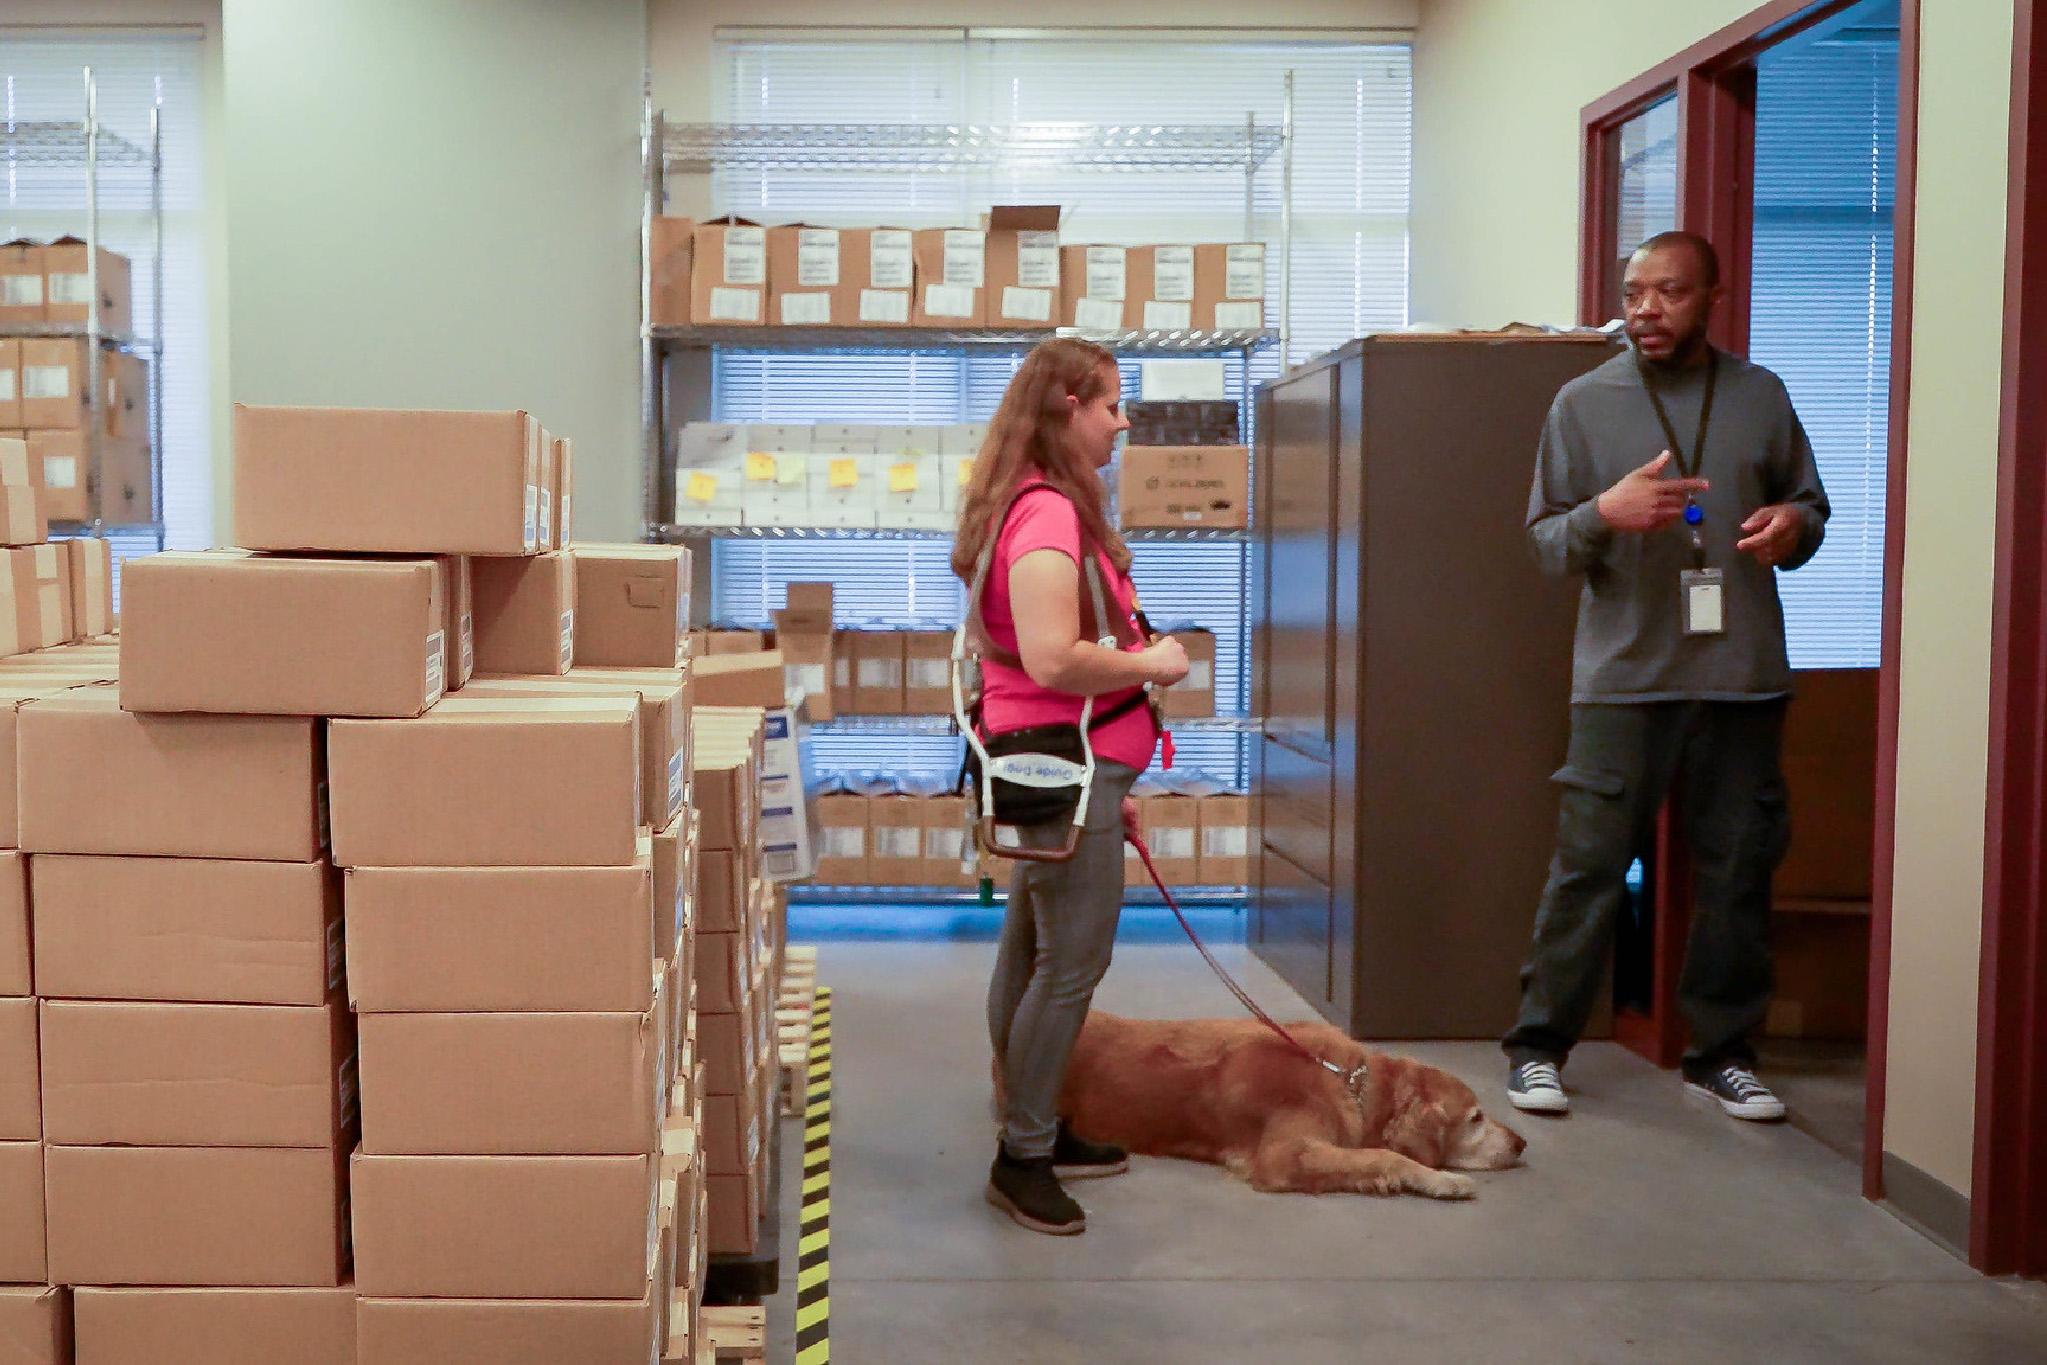 An employee with a service dog speaks with another employee in a warehouse filled with boxes.